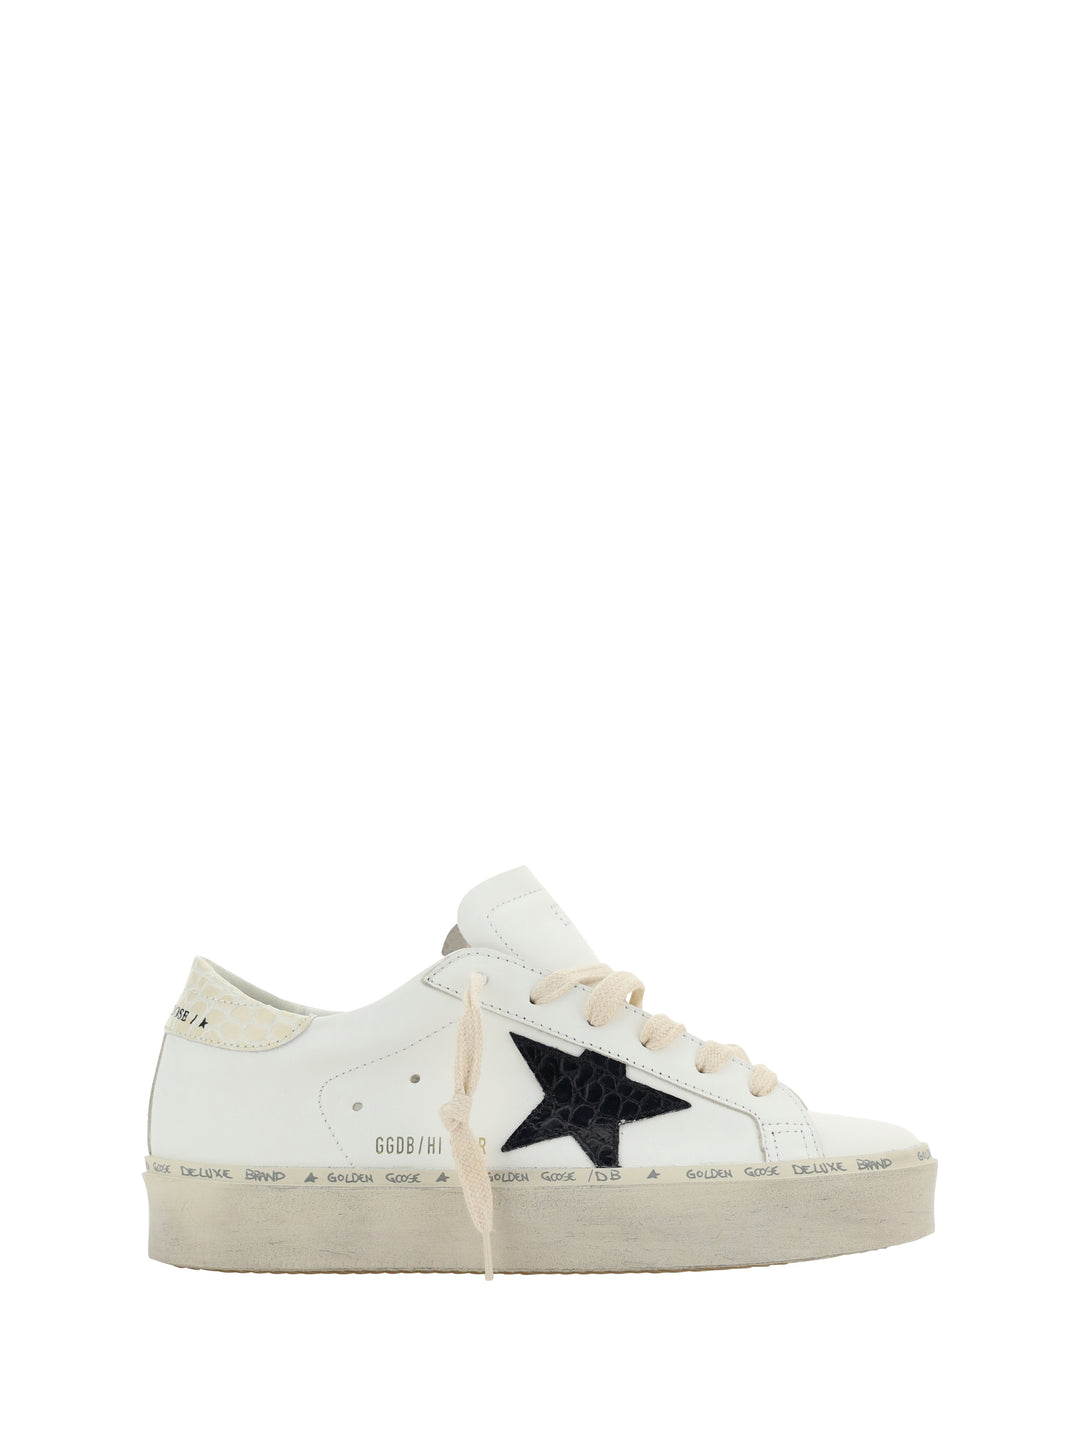 Sneakers Hi Star in pelle con Star stampa cocco